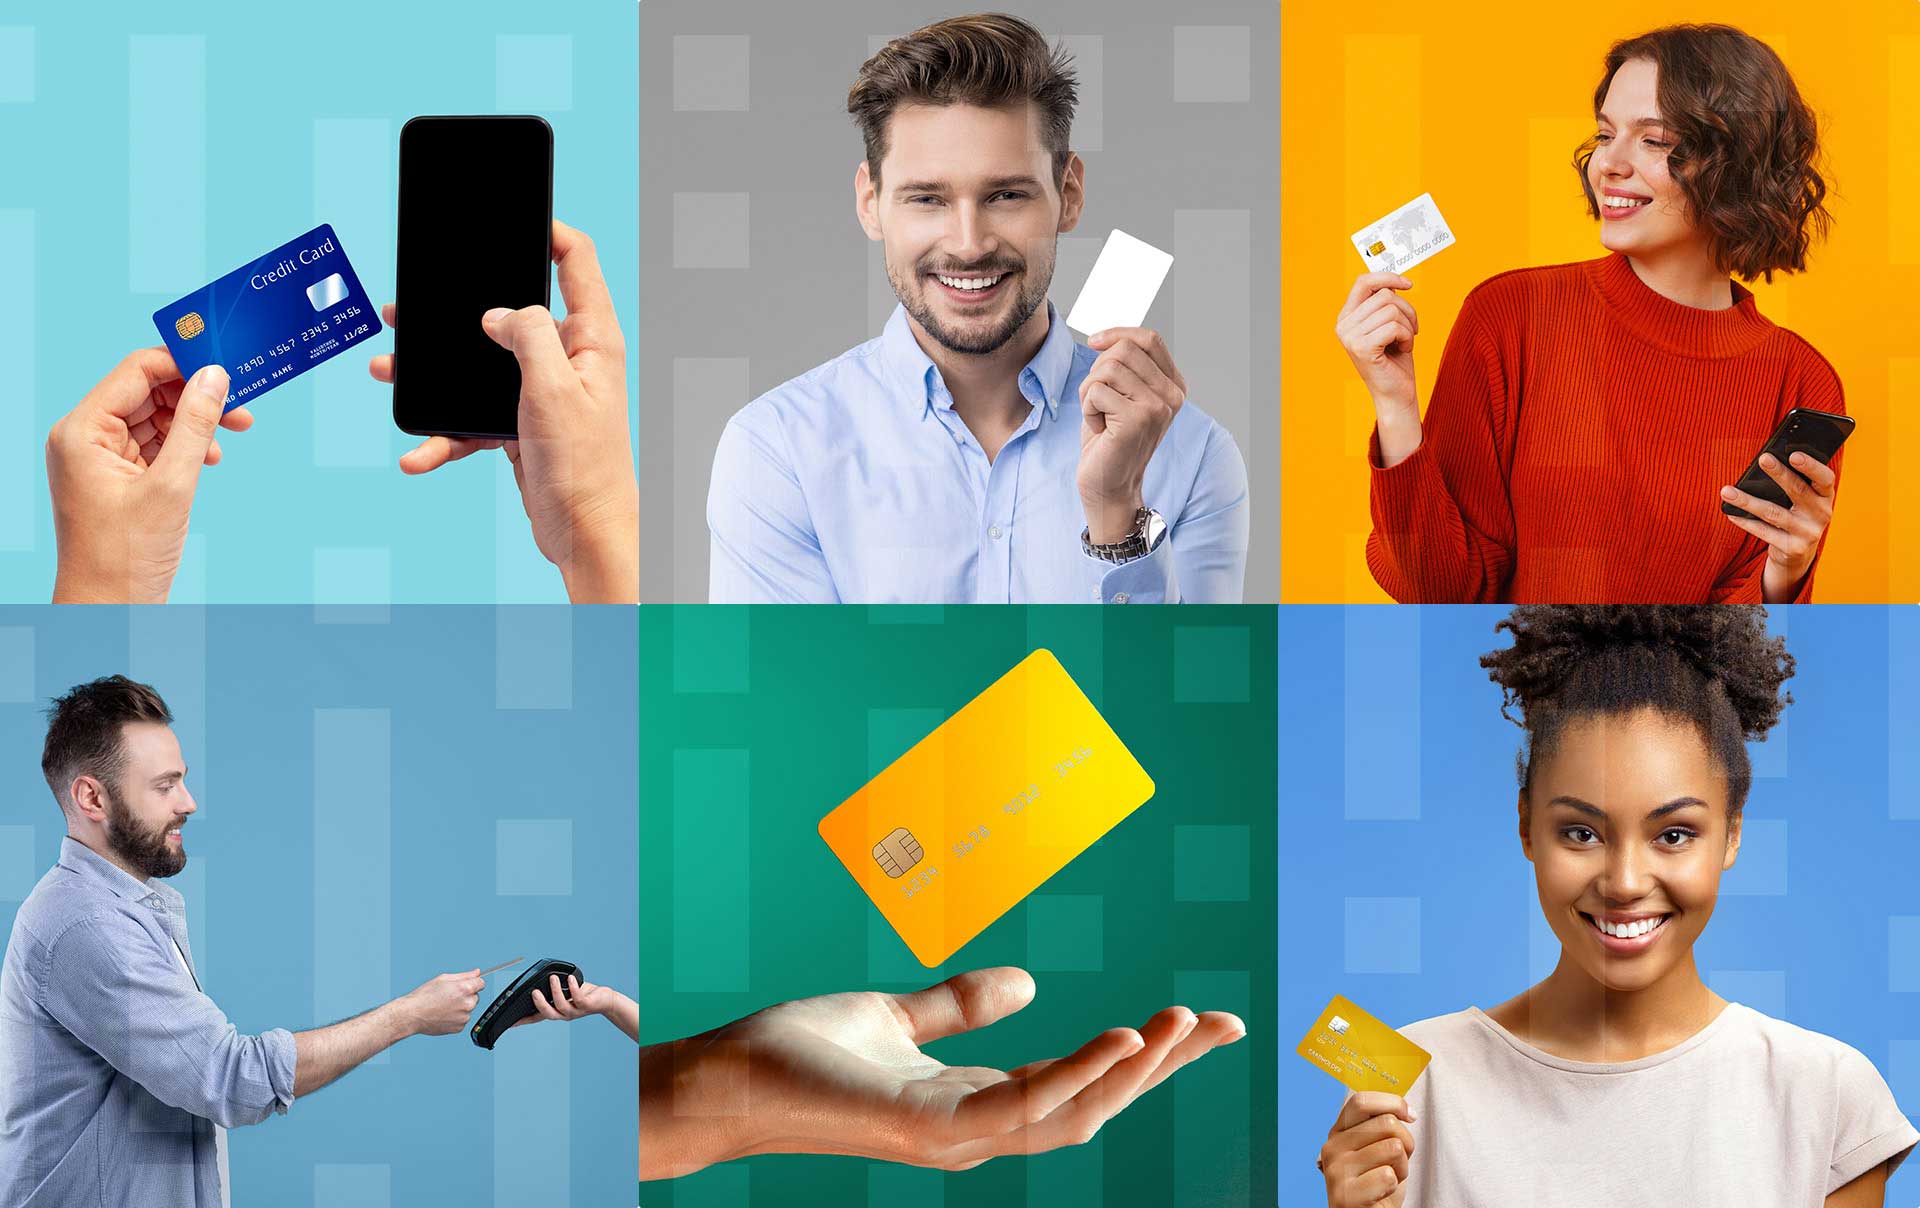 6 tiled images, 3 on top, 3 on bottom. 4 have people with credit cards in various poses. 1 has a credit card and a cell phone. one has a hand holding a credit card